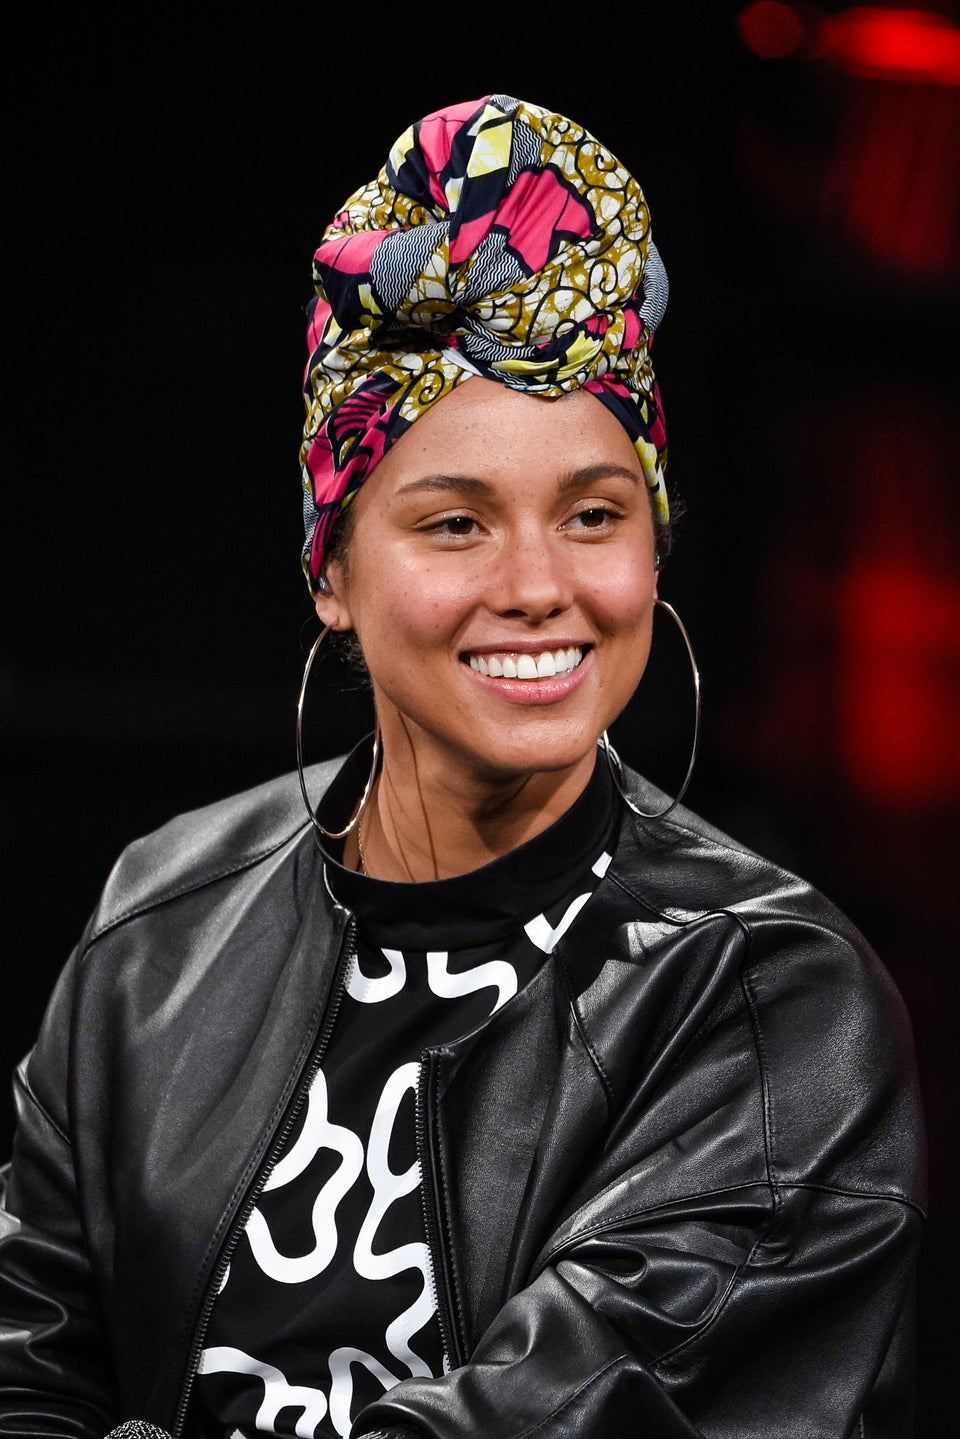 Alicia Keys urges fans to vote for Hillary Clinton in powerful PSA